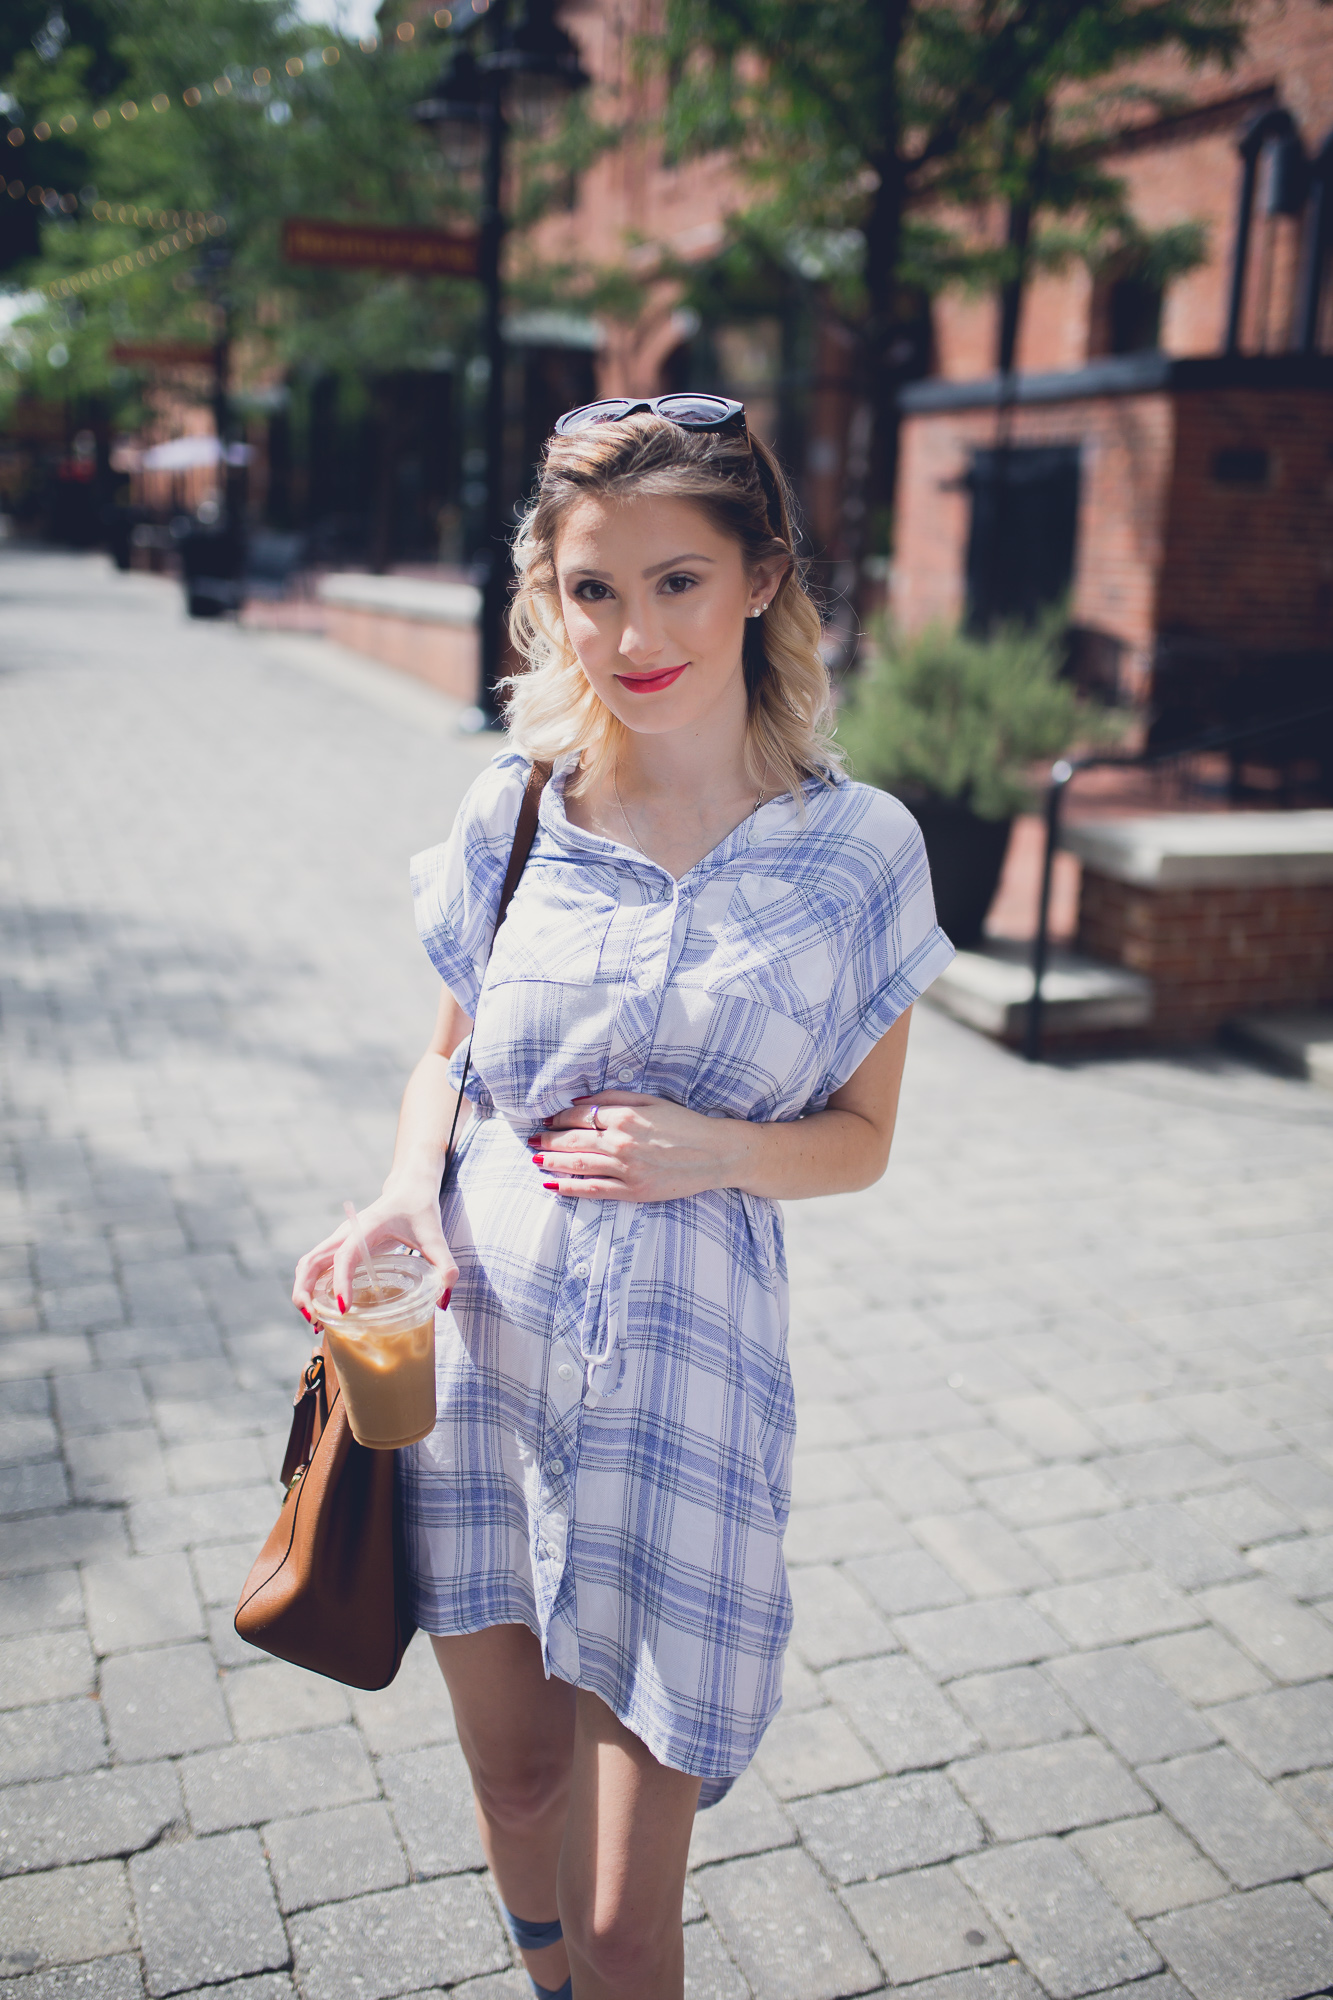 Fashion, lifestyle, and beauty blogger/ vlogger Jessica Linn on Linn Style wearing a blue and white plaid button up t-shirt dress from Ross, lace up blue sandals from Report footwear, and jewelry from local Cary North Carolina business CY Design Studio and lipstick from locally made all natural organic lipstick from SumerReign Cosmetics by Ashley Summerville in Durham NC.